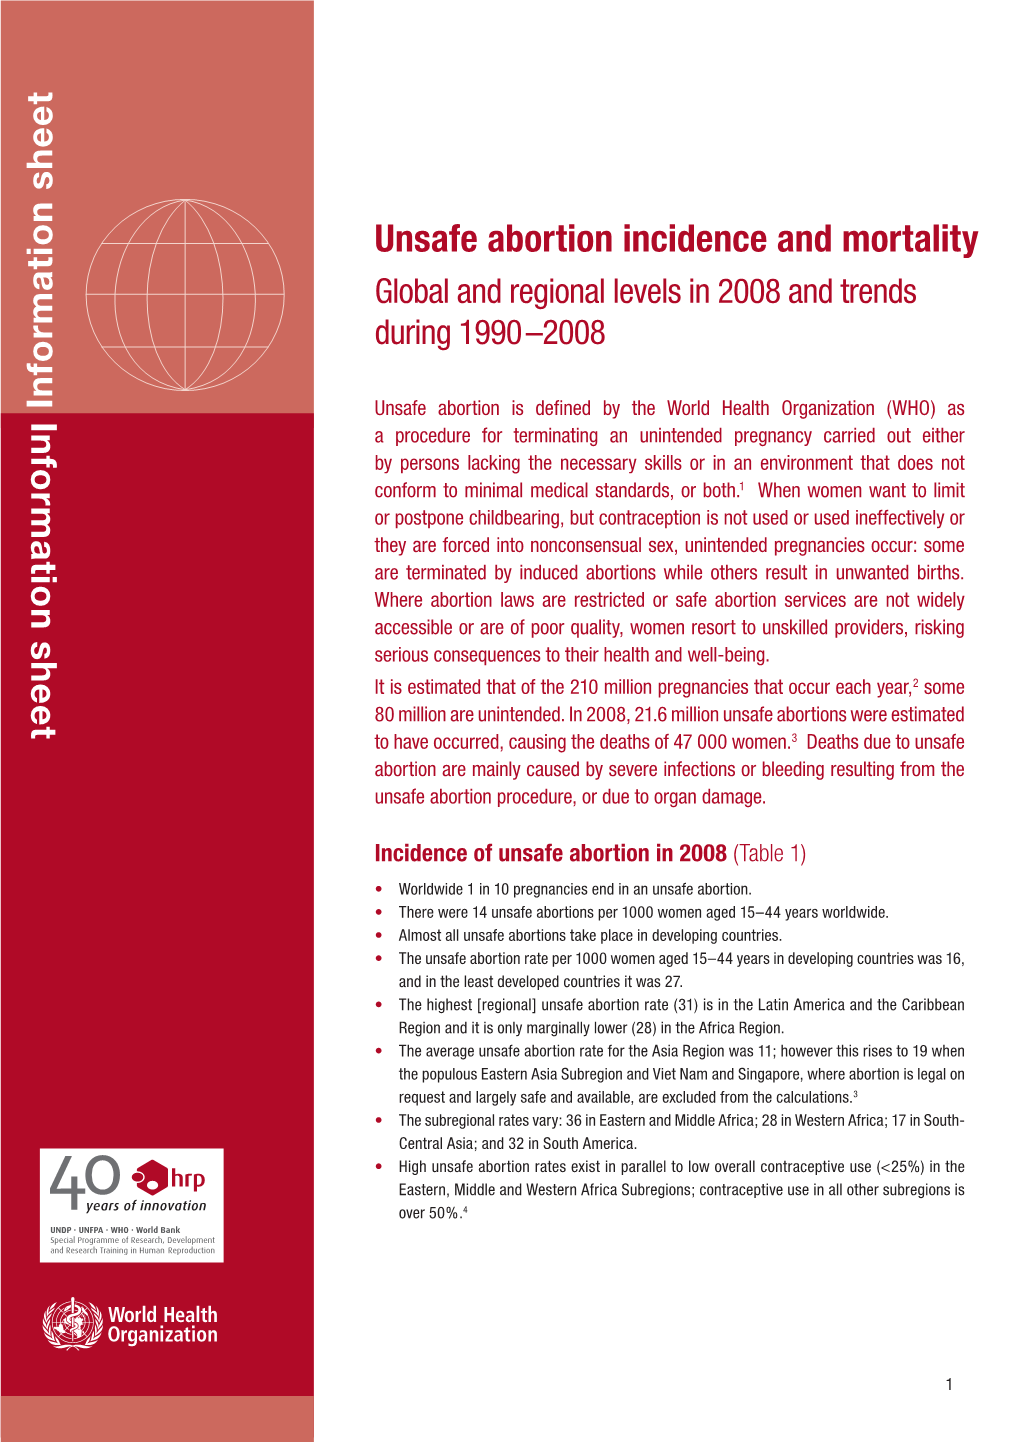 Unsafe Abortion Incidence and Mortality Global and Regional Levels in 2008 and Trends During 1990 –2008